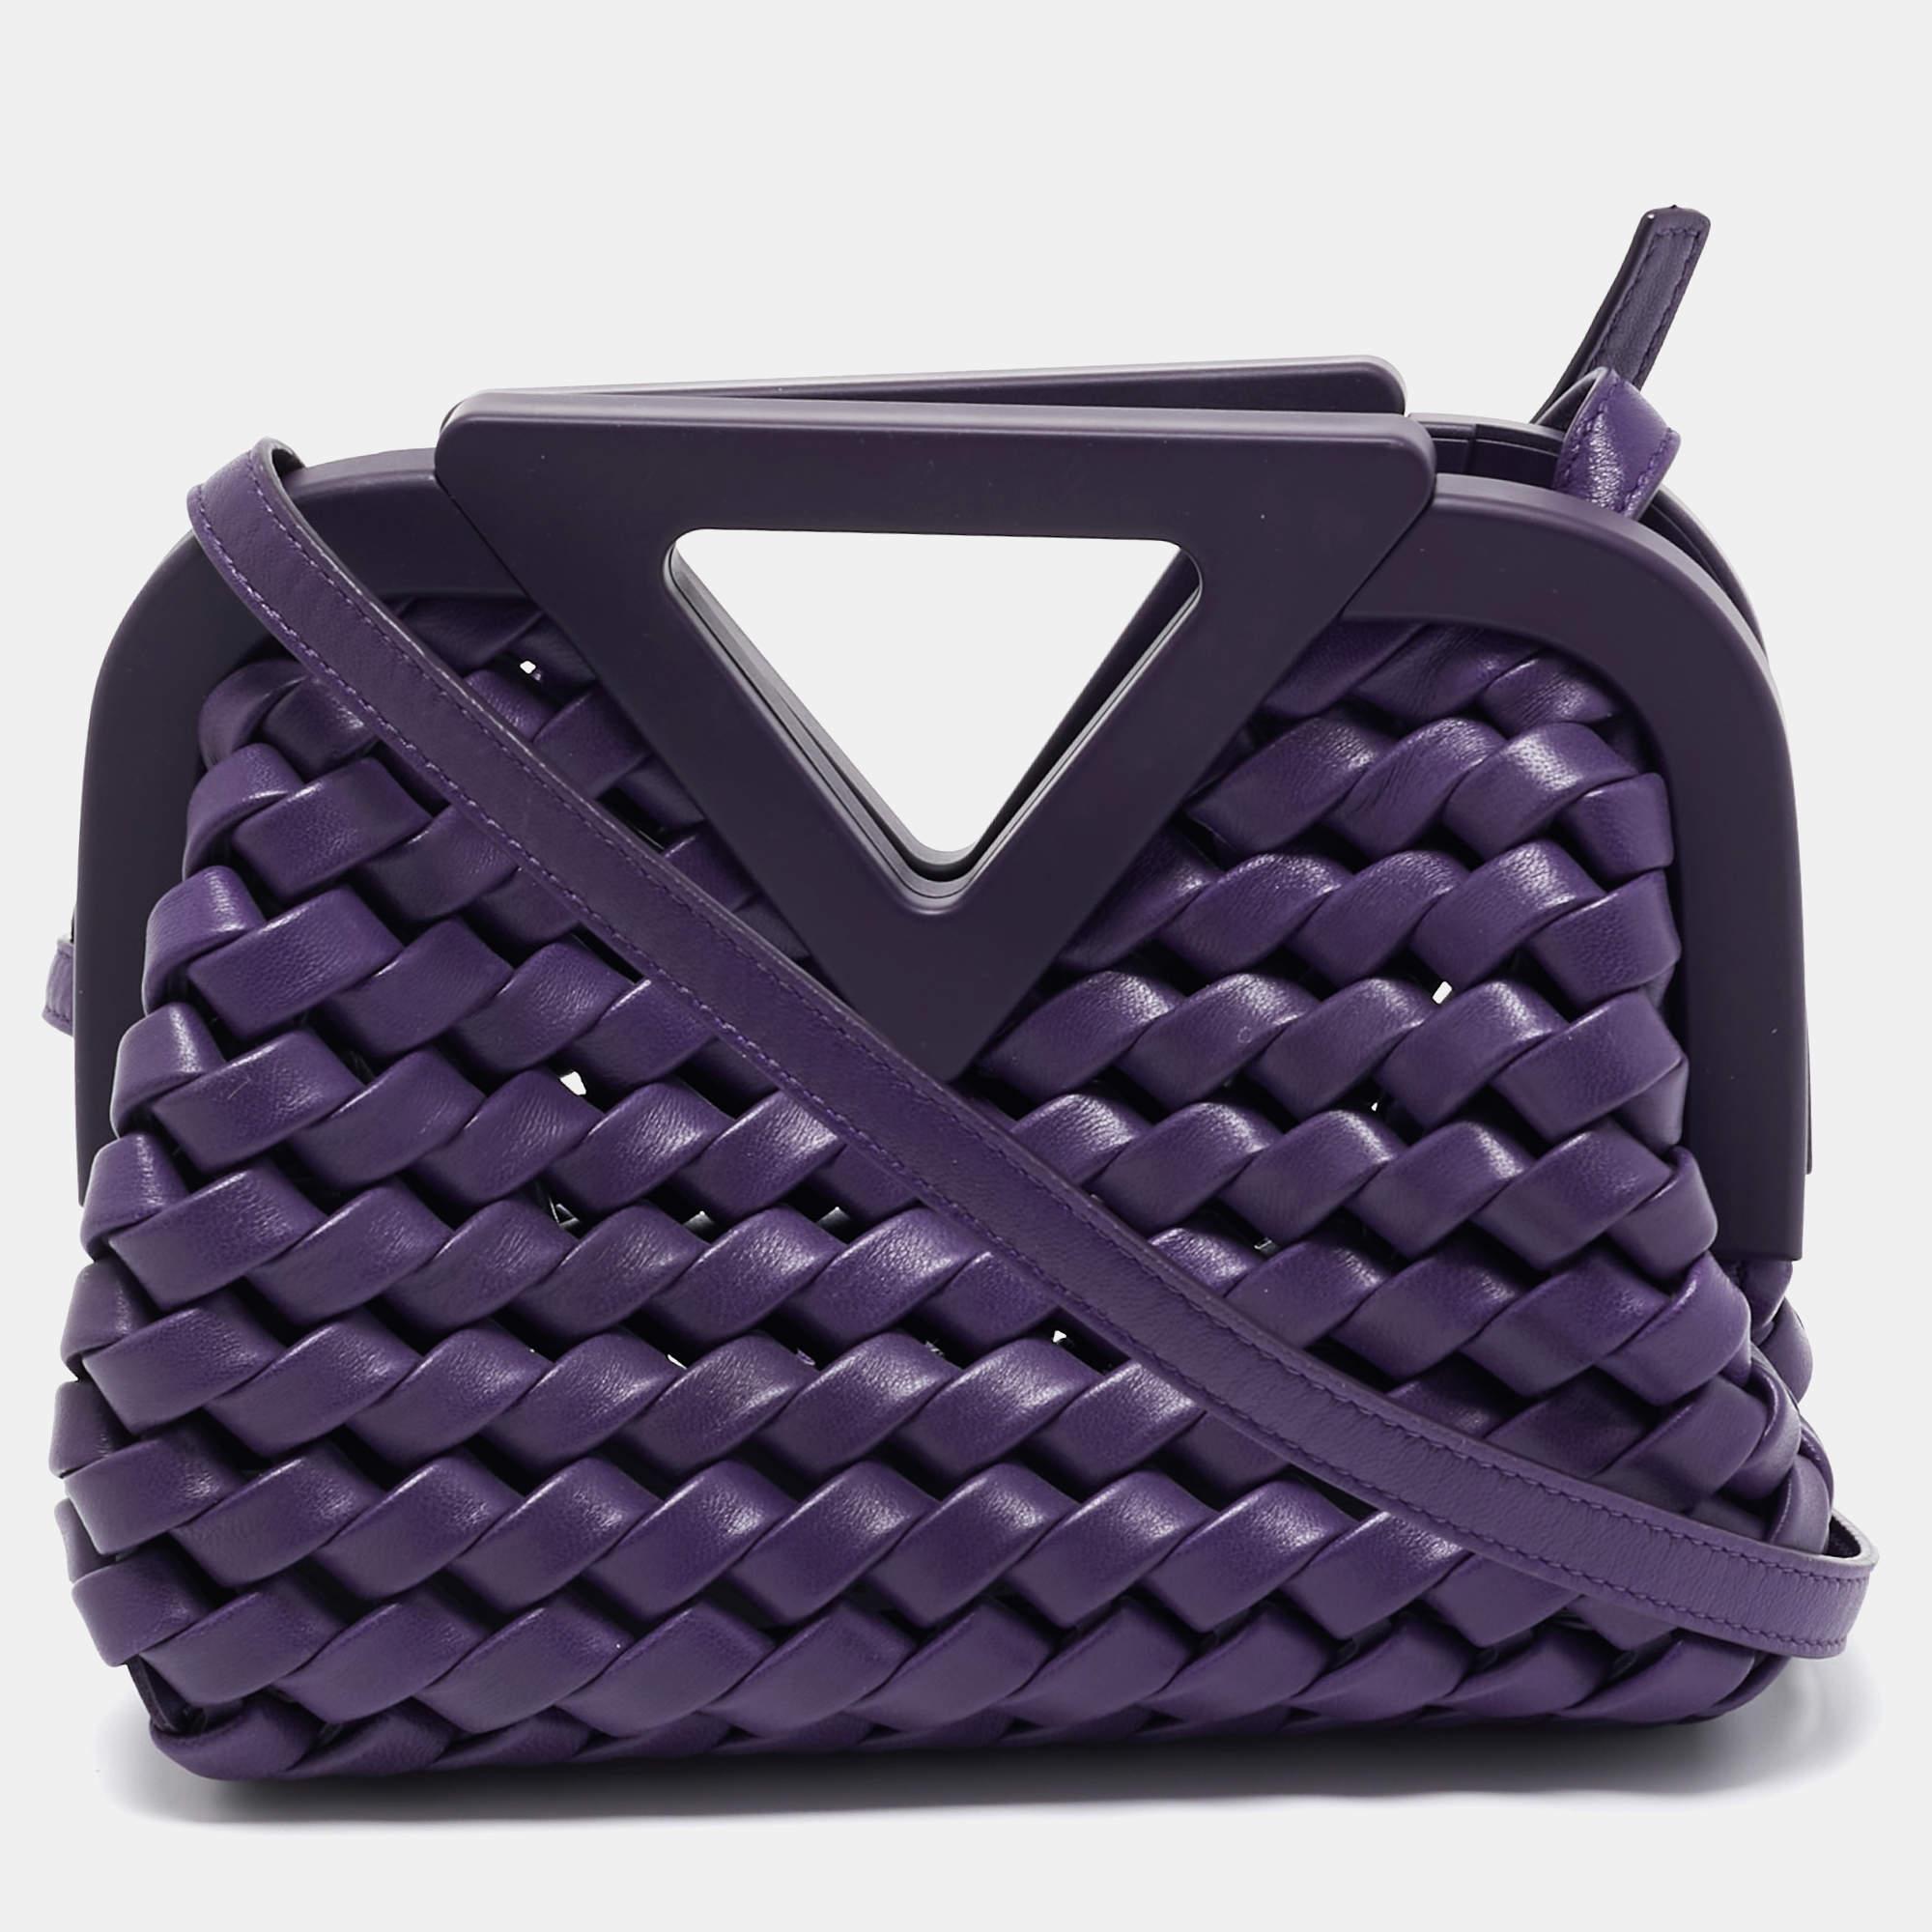 This Bottega Veneta Point shoulder bag presents an artistic weave design through the use of purple leather. It has a frame top, a lined interior, and an adjustable shoulder strap. Make it part of your modern wardrobe.

Includes: Original Dustbag,